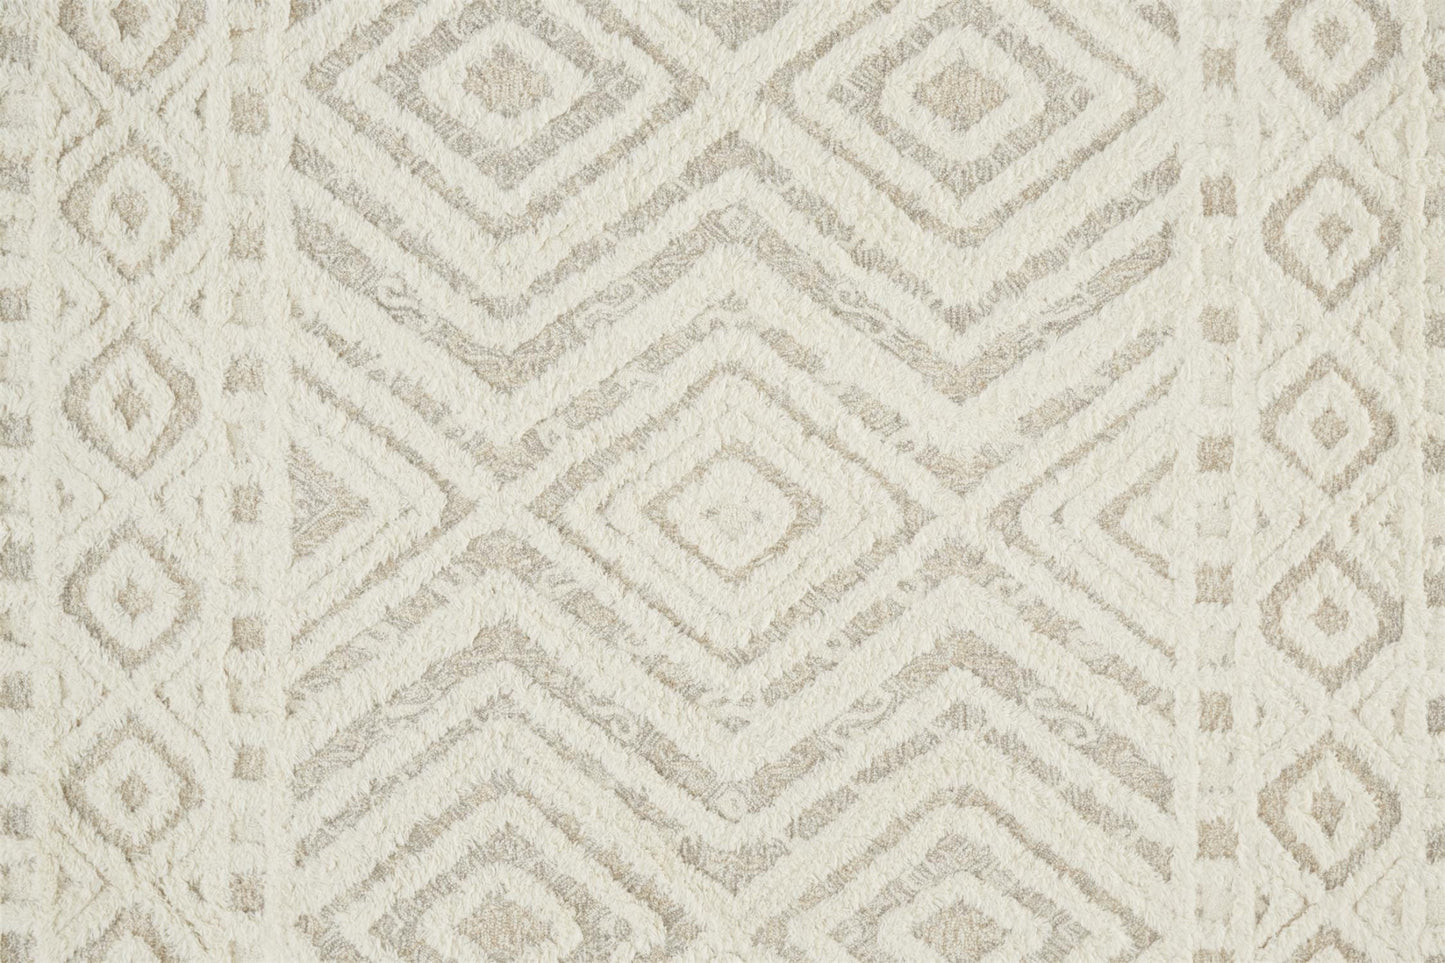 8' X 10' Ivory And Tan Wool Geometric Tufted Handmade Stain Resistant Area Rug